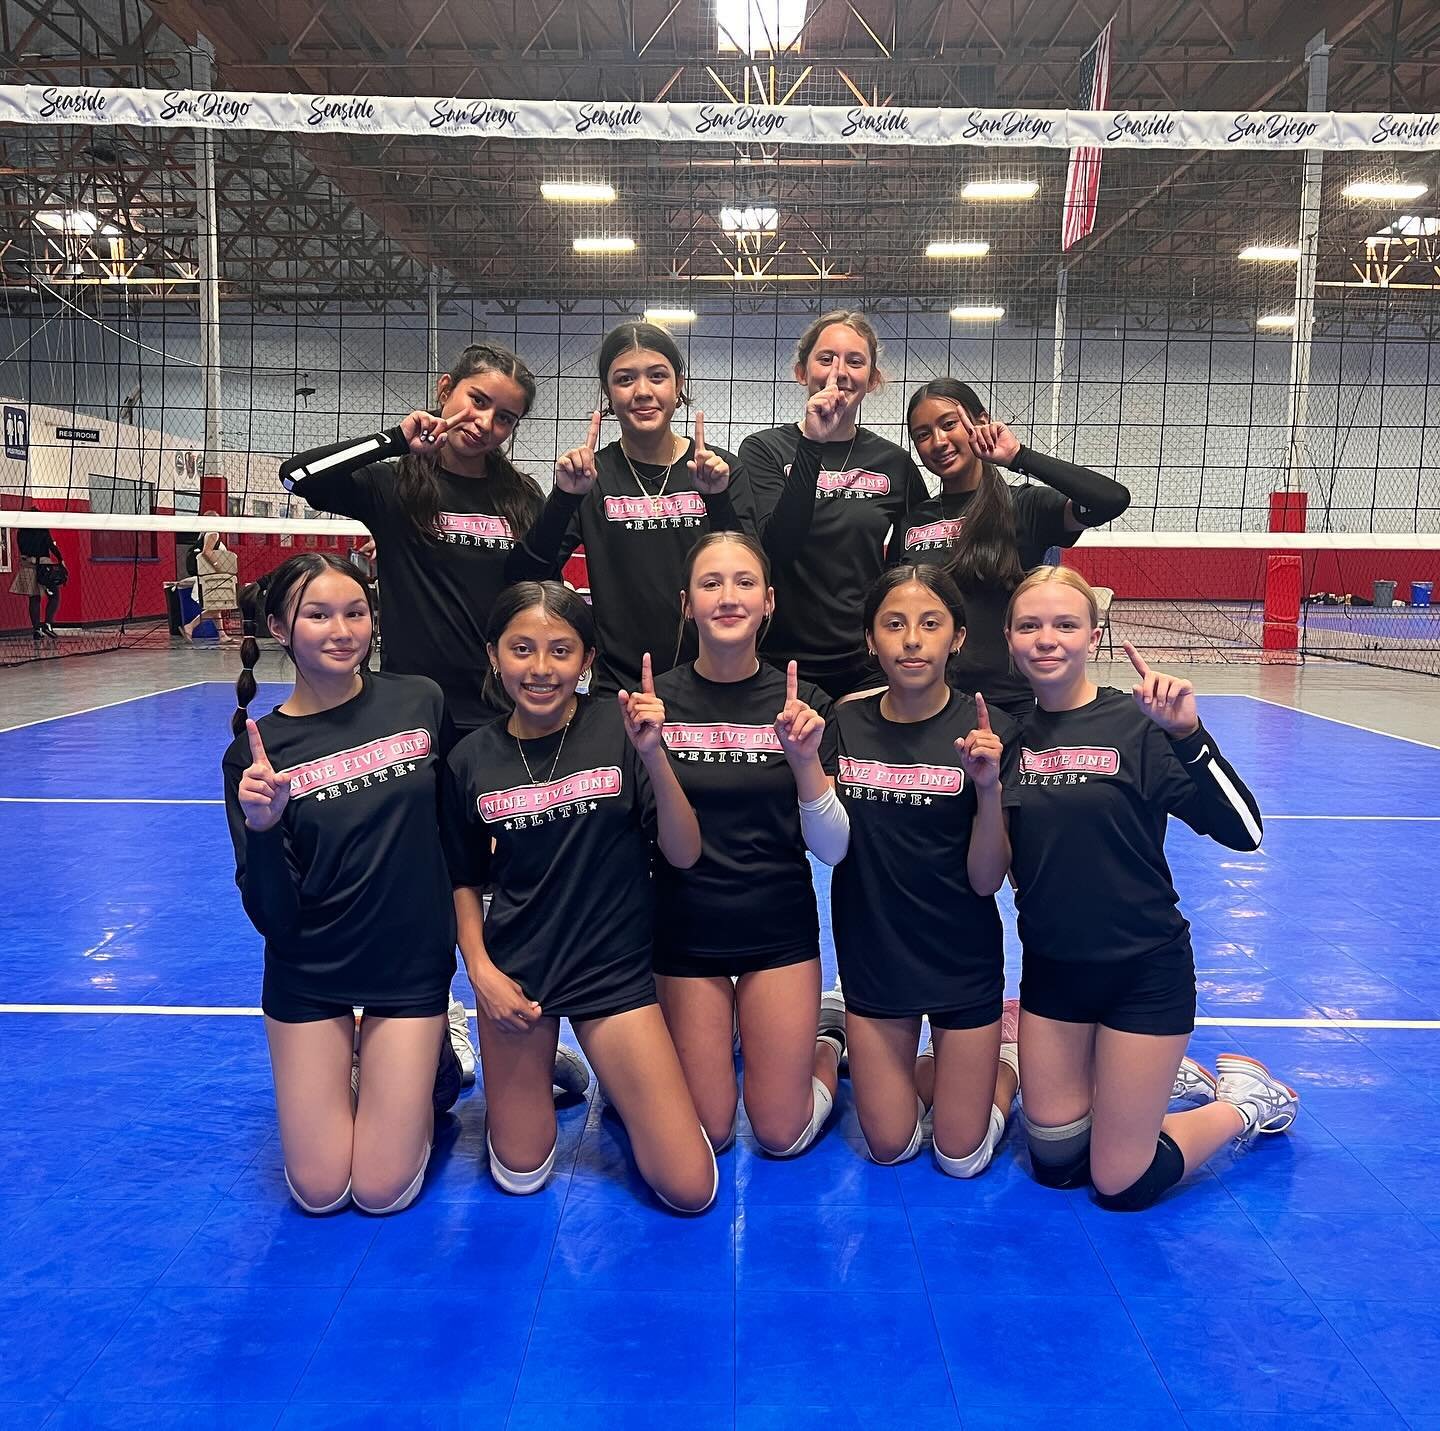 Locals HS Talen goes 3-0 at today&rsquo;s tournament! #951elitevolleyball